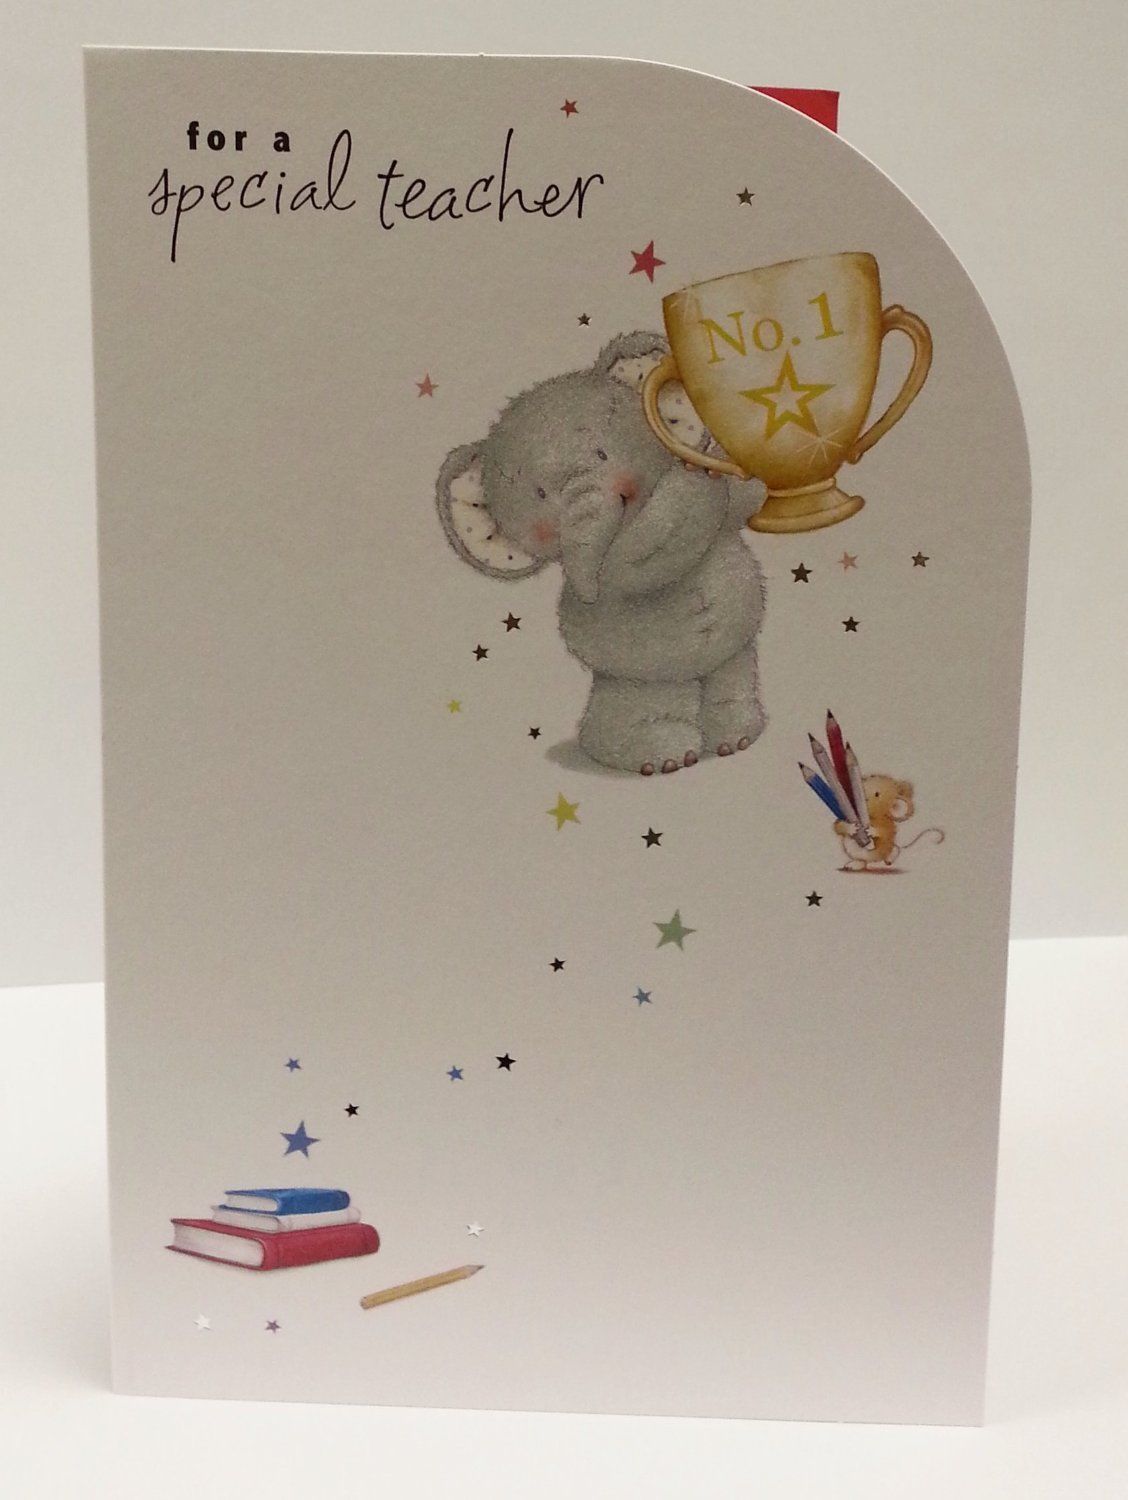 For Special Teacher Elliot And Buttons With Trophy Thank You Card 